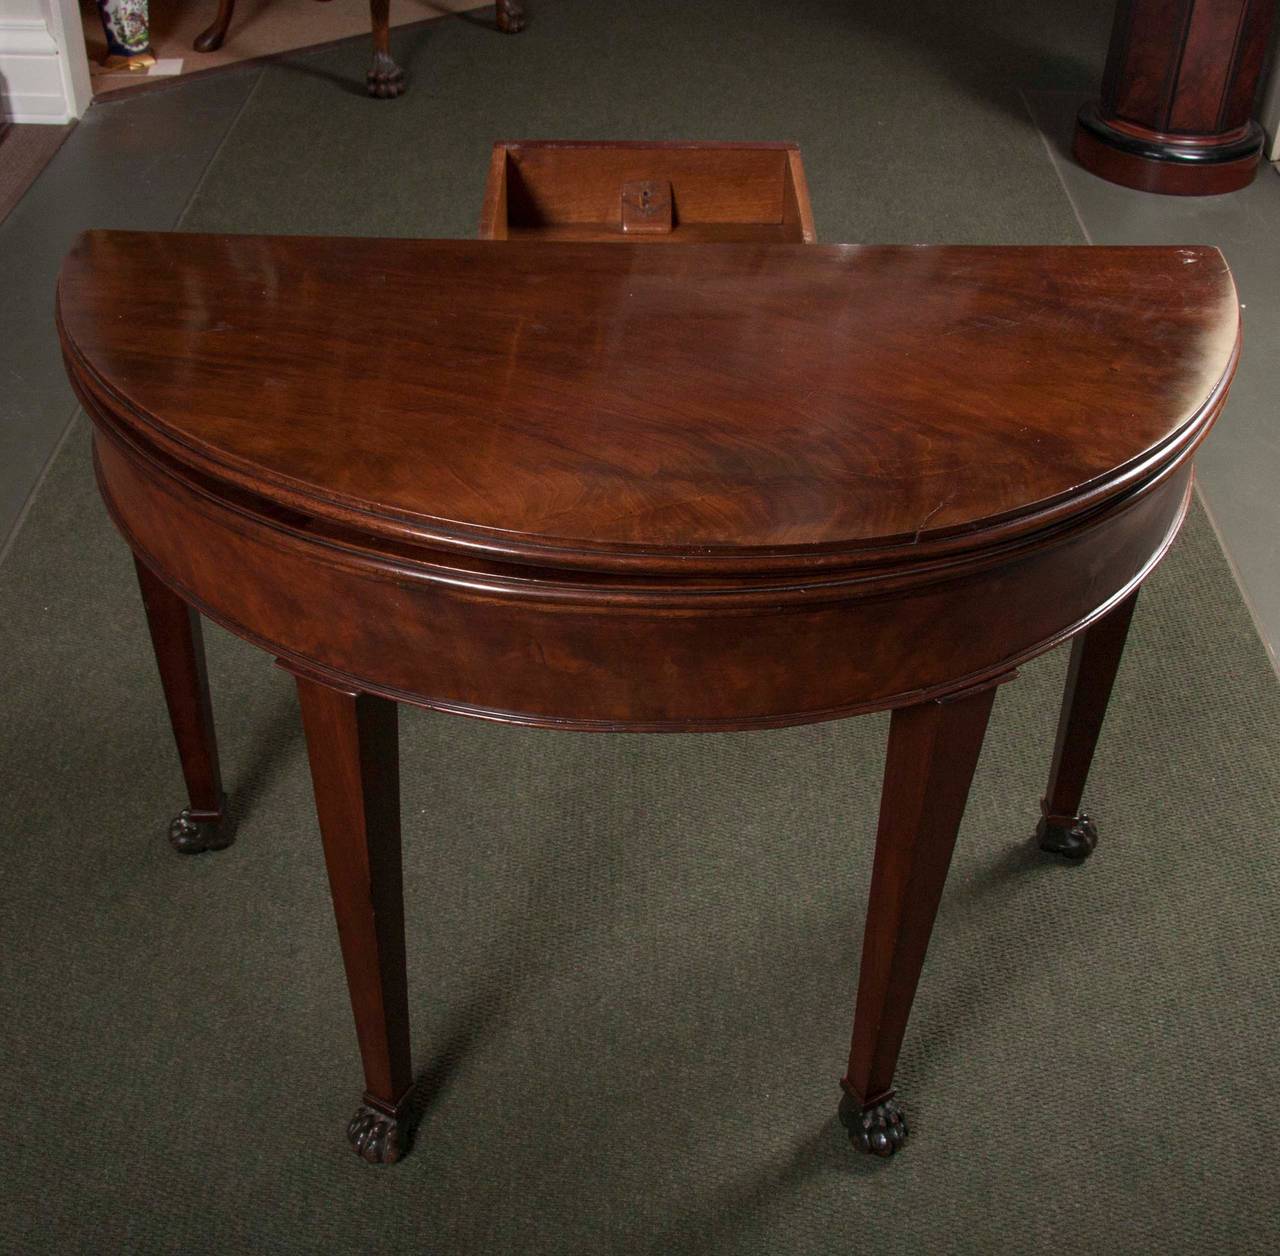 A Louis Philippe style mahogany, D-shaped games table with a folding top and a green-leather lined interior surface. The five tapered legs are terminated in carved paw feet.